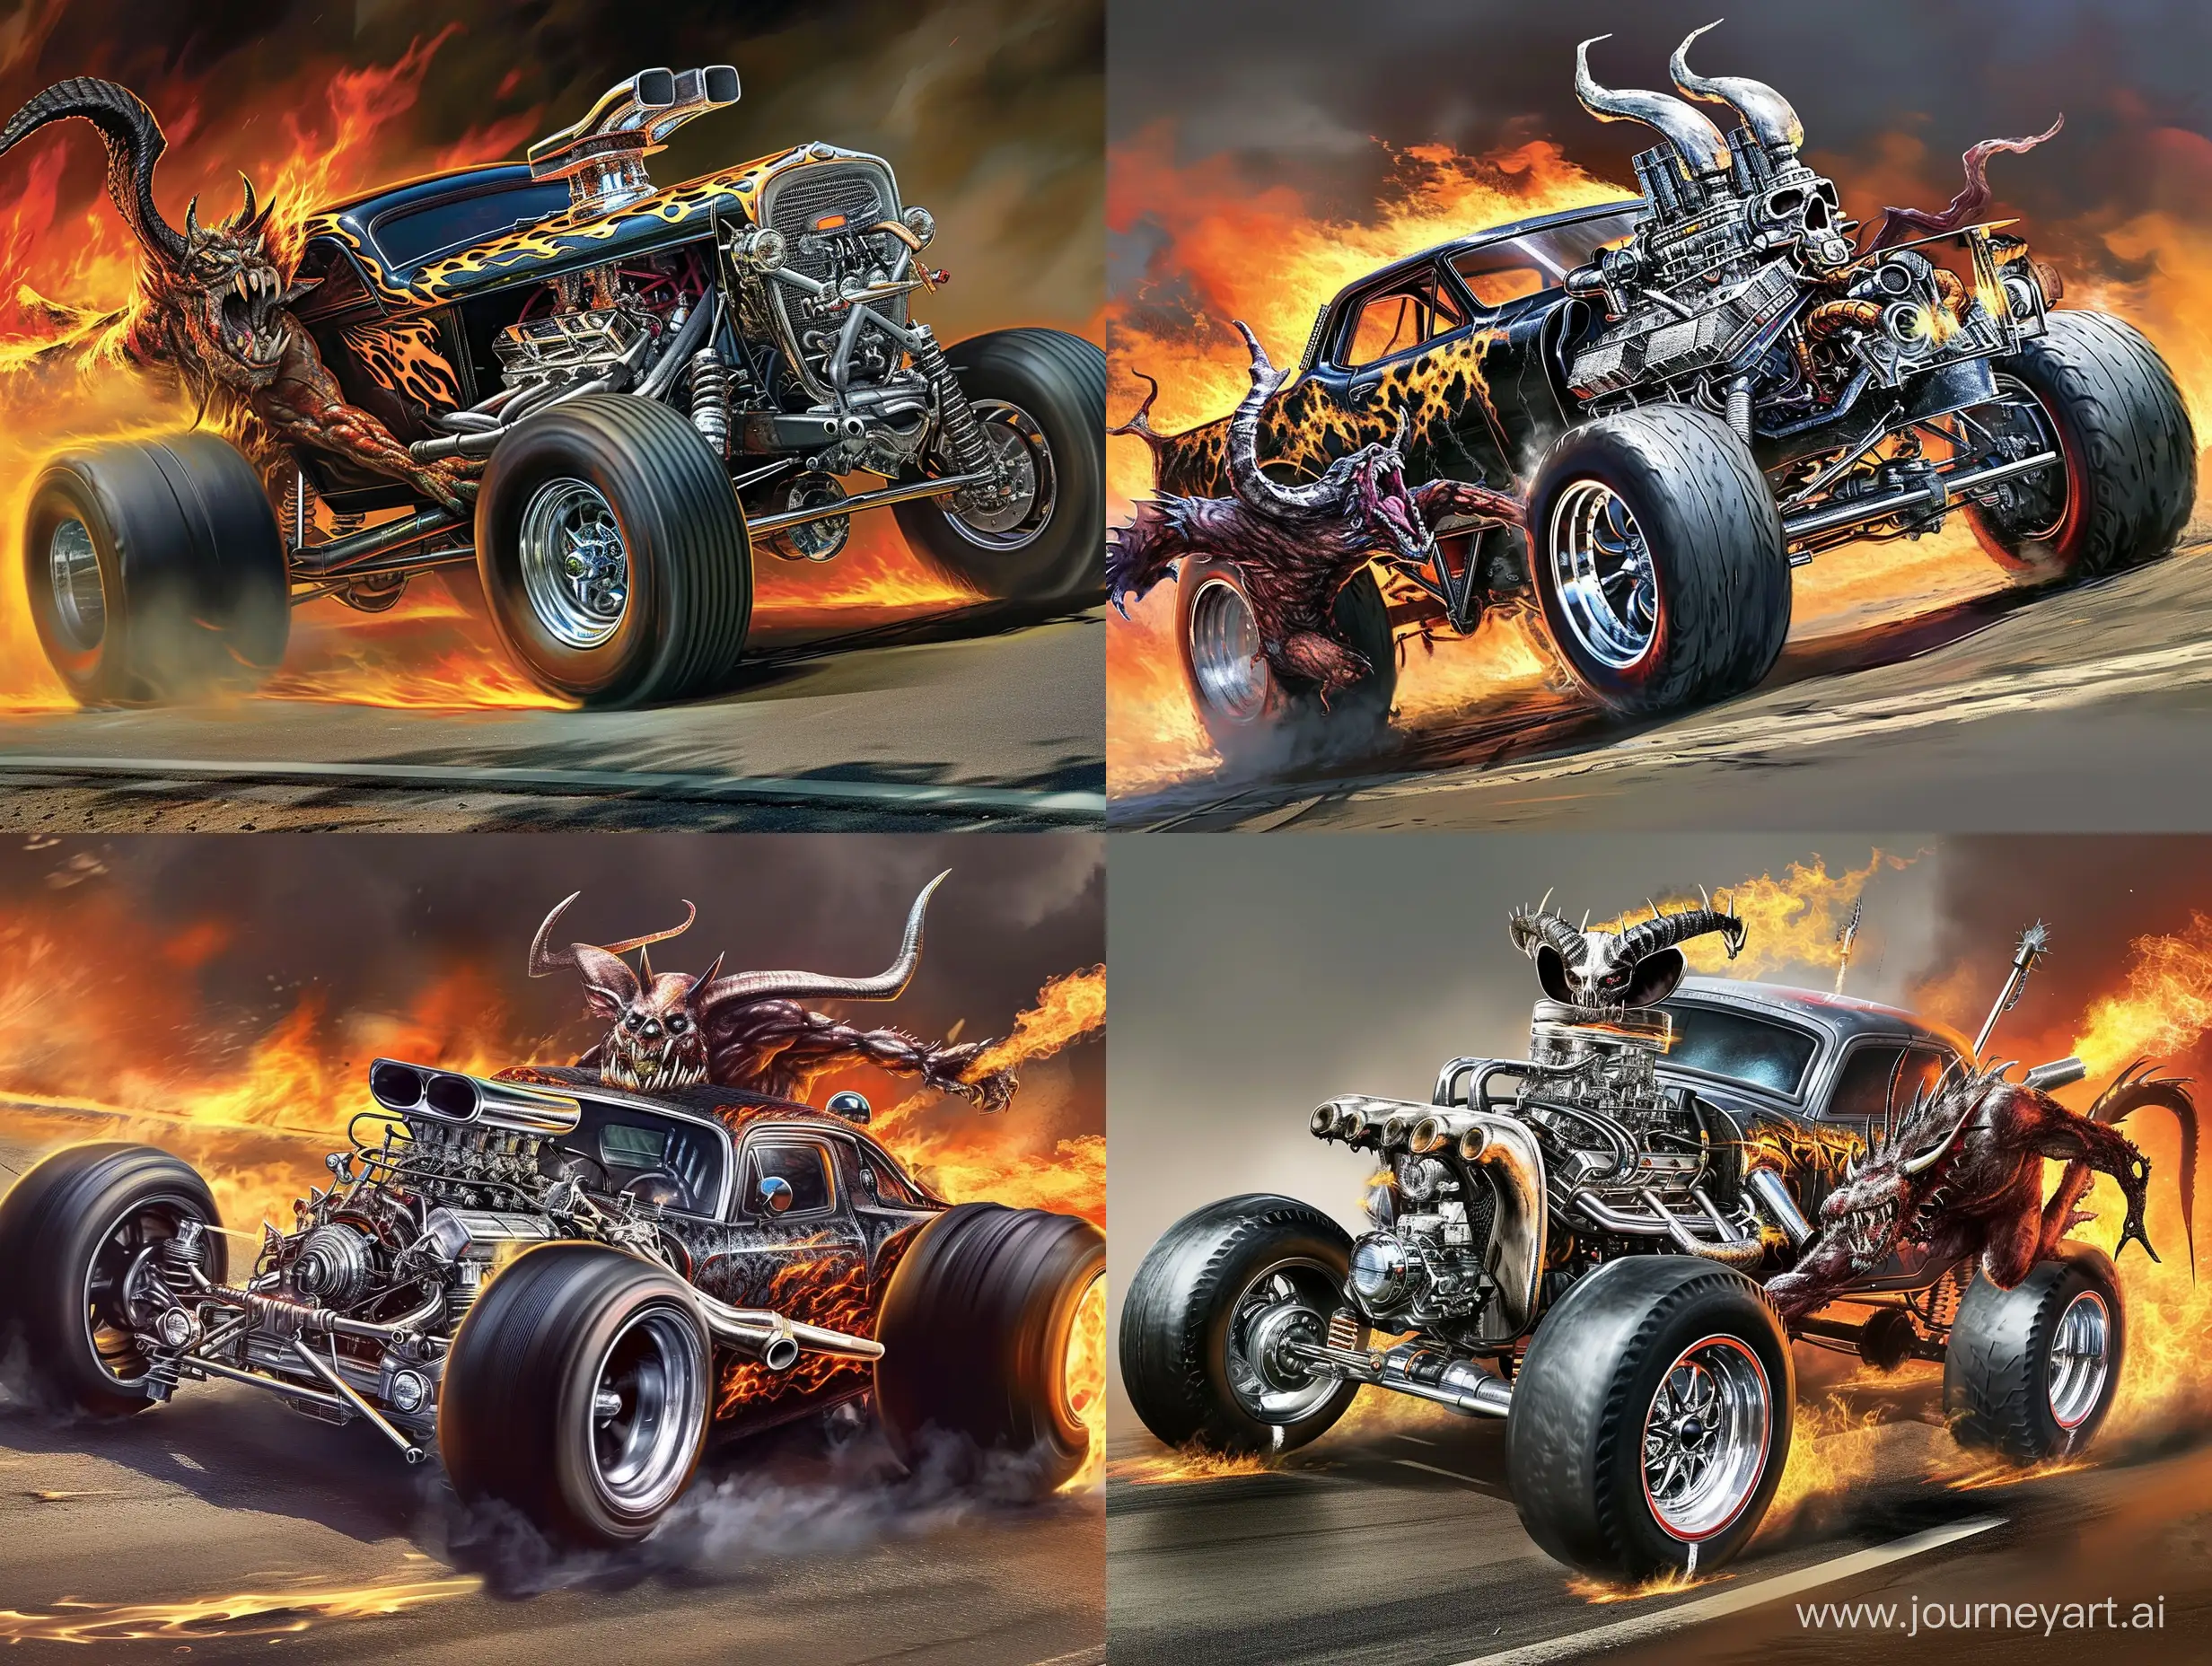 An extreme sports car. It has an elaborate custom, fire, chrome, and black auto design. A horned devil is pushing the car. The engine is oversized, and has a chrome, overhead air breather, extruding from the front hood. The suspension is supported by monster truck tires with chrome rims. The road and the vehicle are on fire.